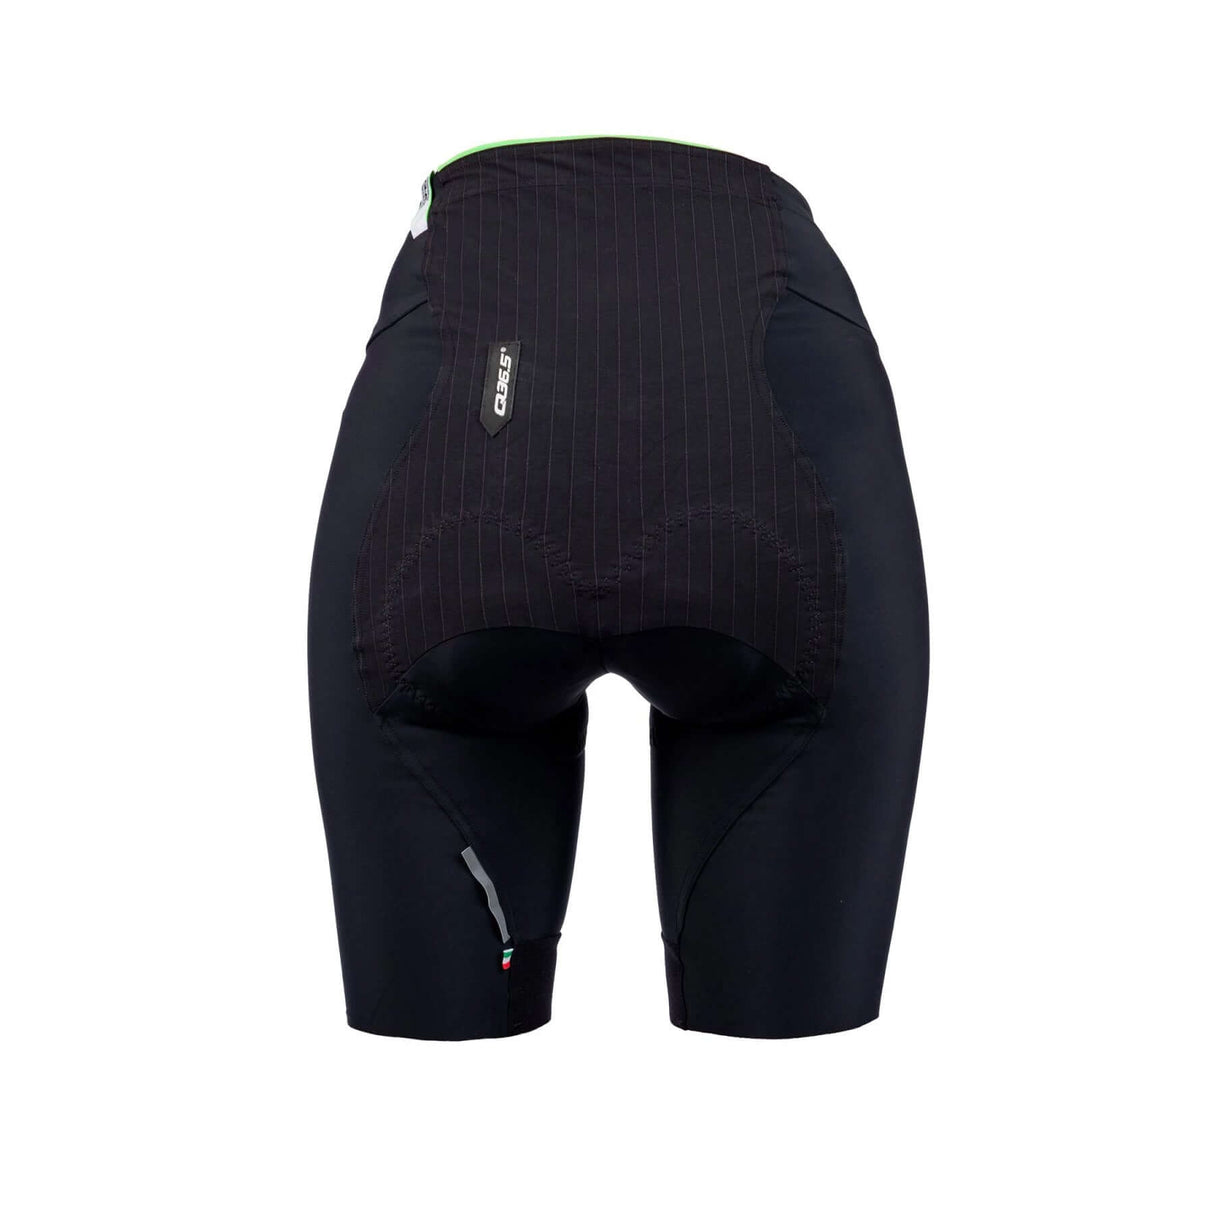 Q36.5 Essential Half Shorts Women | Strictly Bicycles